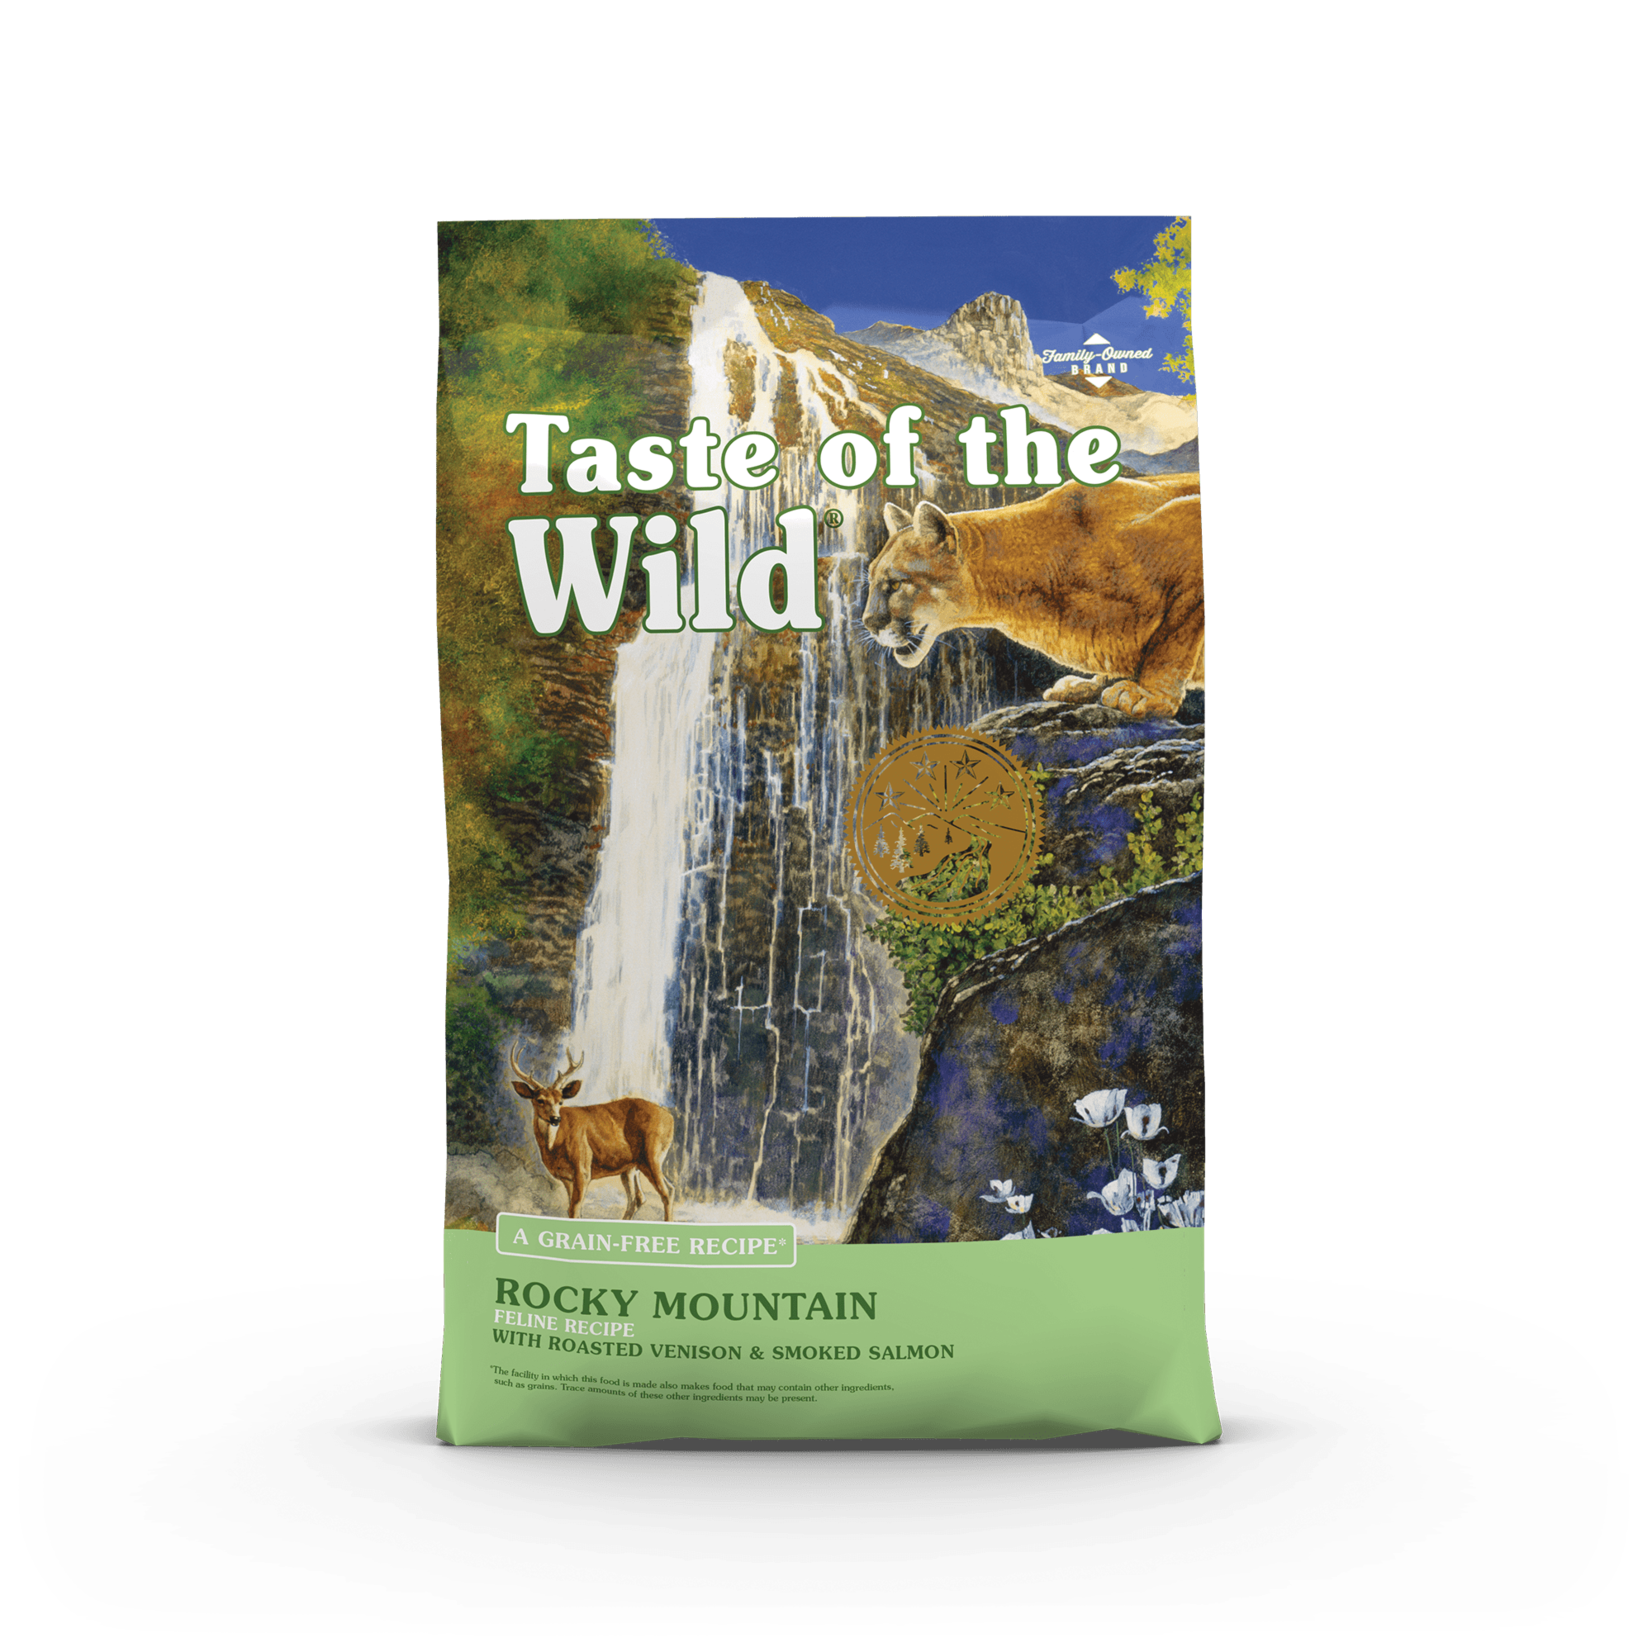 Taste of the Wild Taste of the Wild Dry Cat Food Rocky Mountain Recipe with Roasted Venison & Smoked Salmon Grain Free